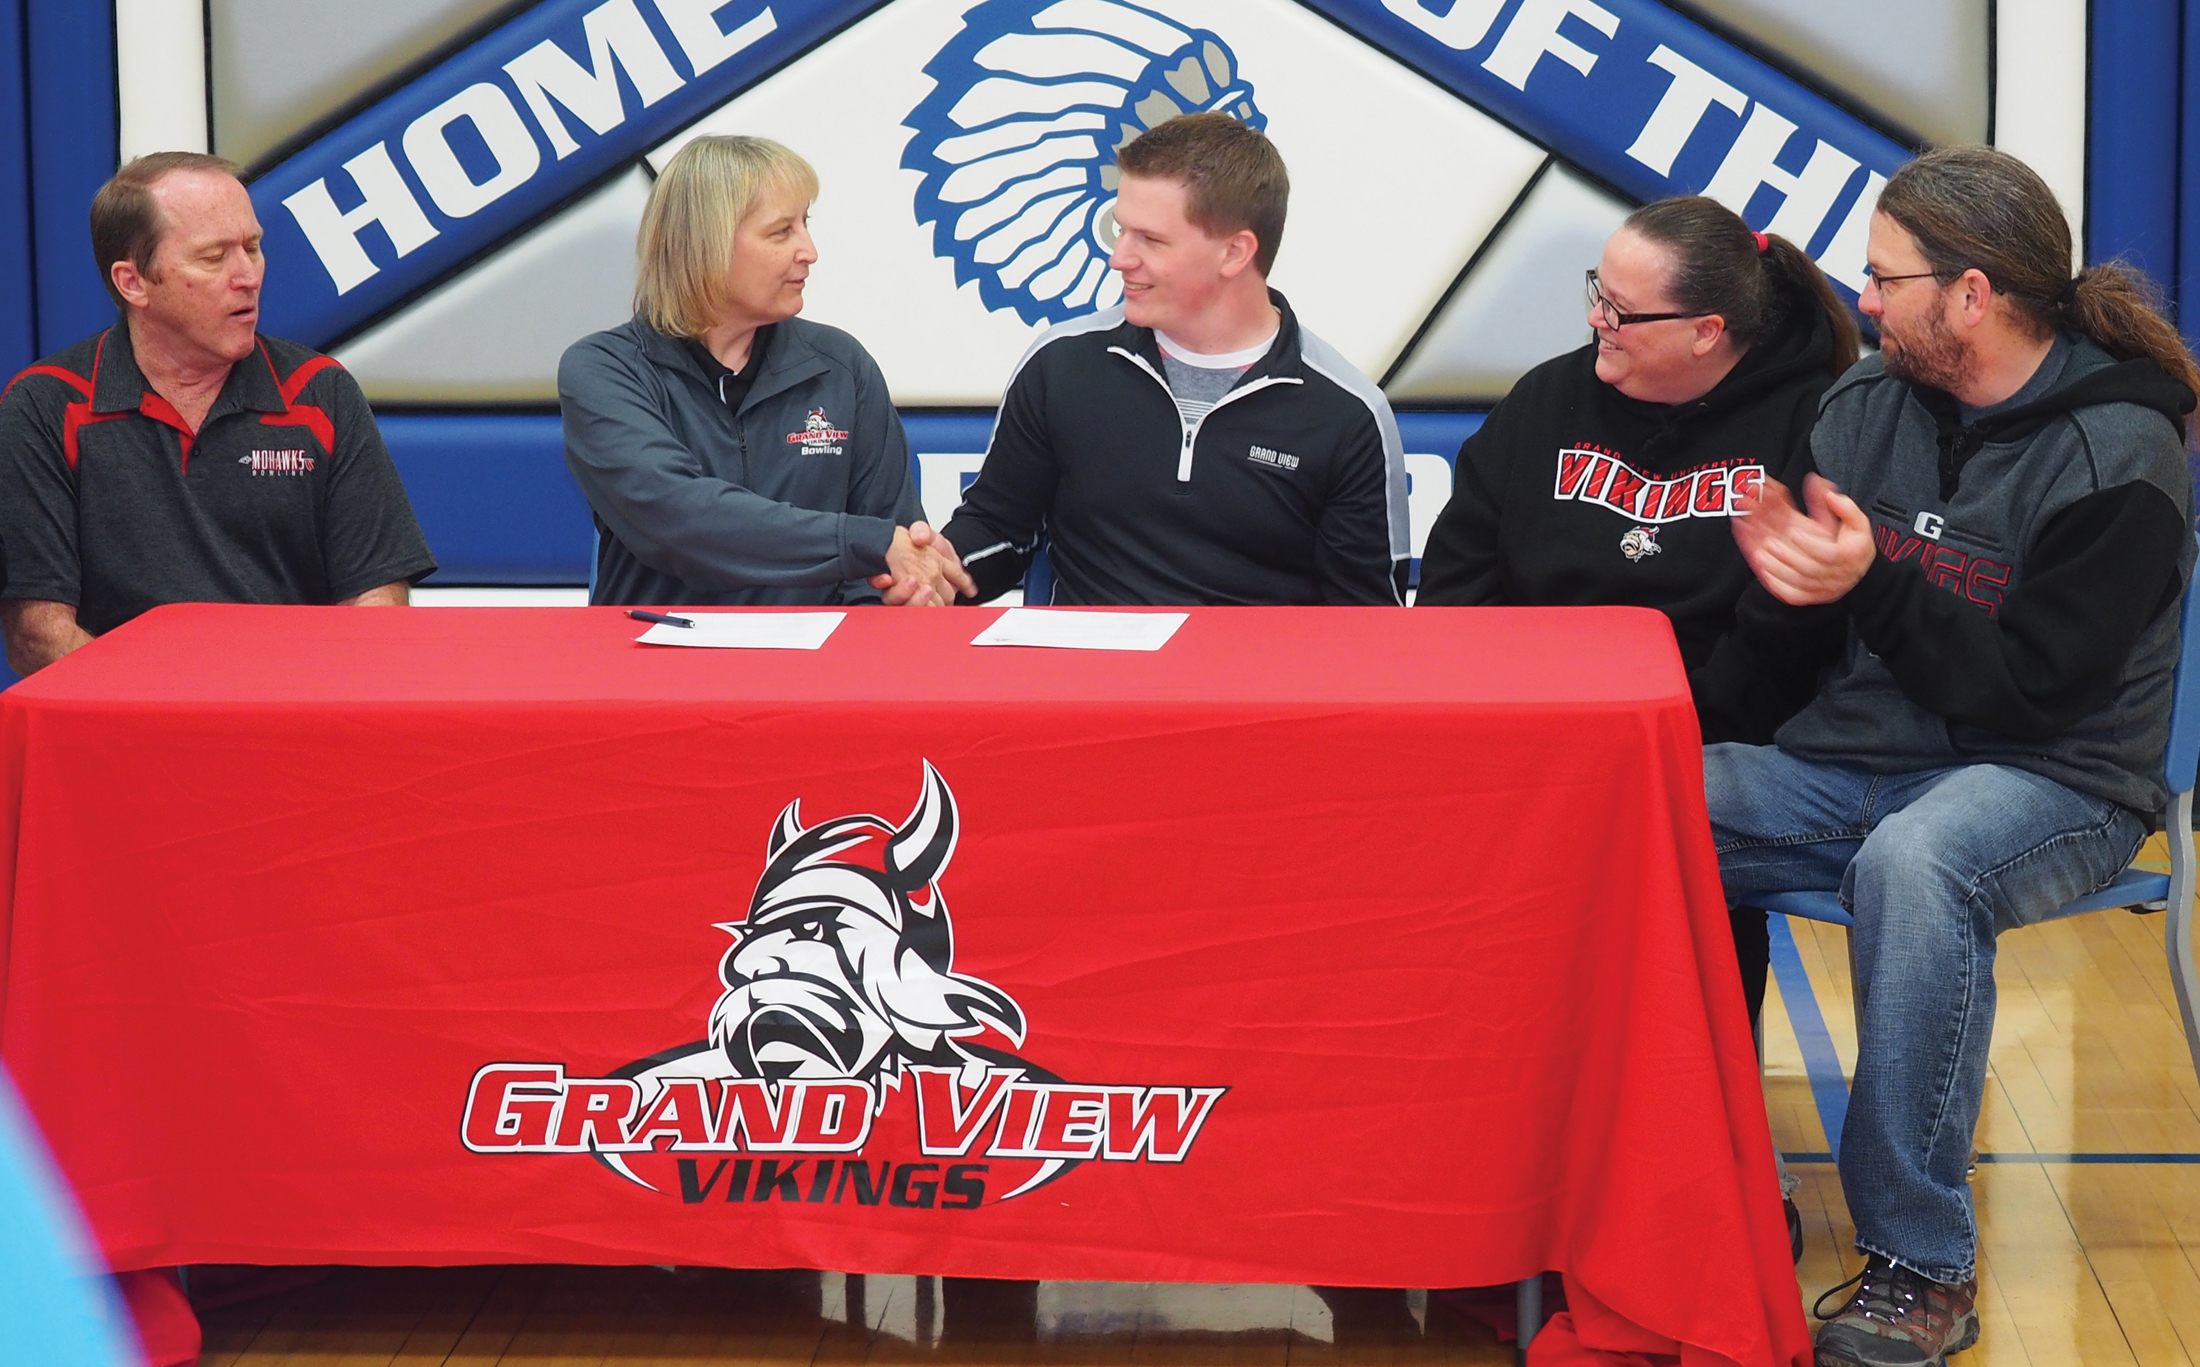 Arickx to continue rolling with Grand View University